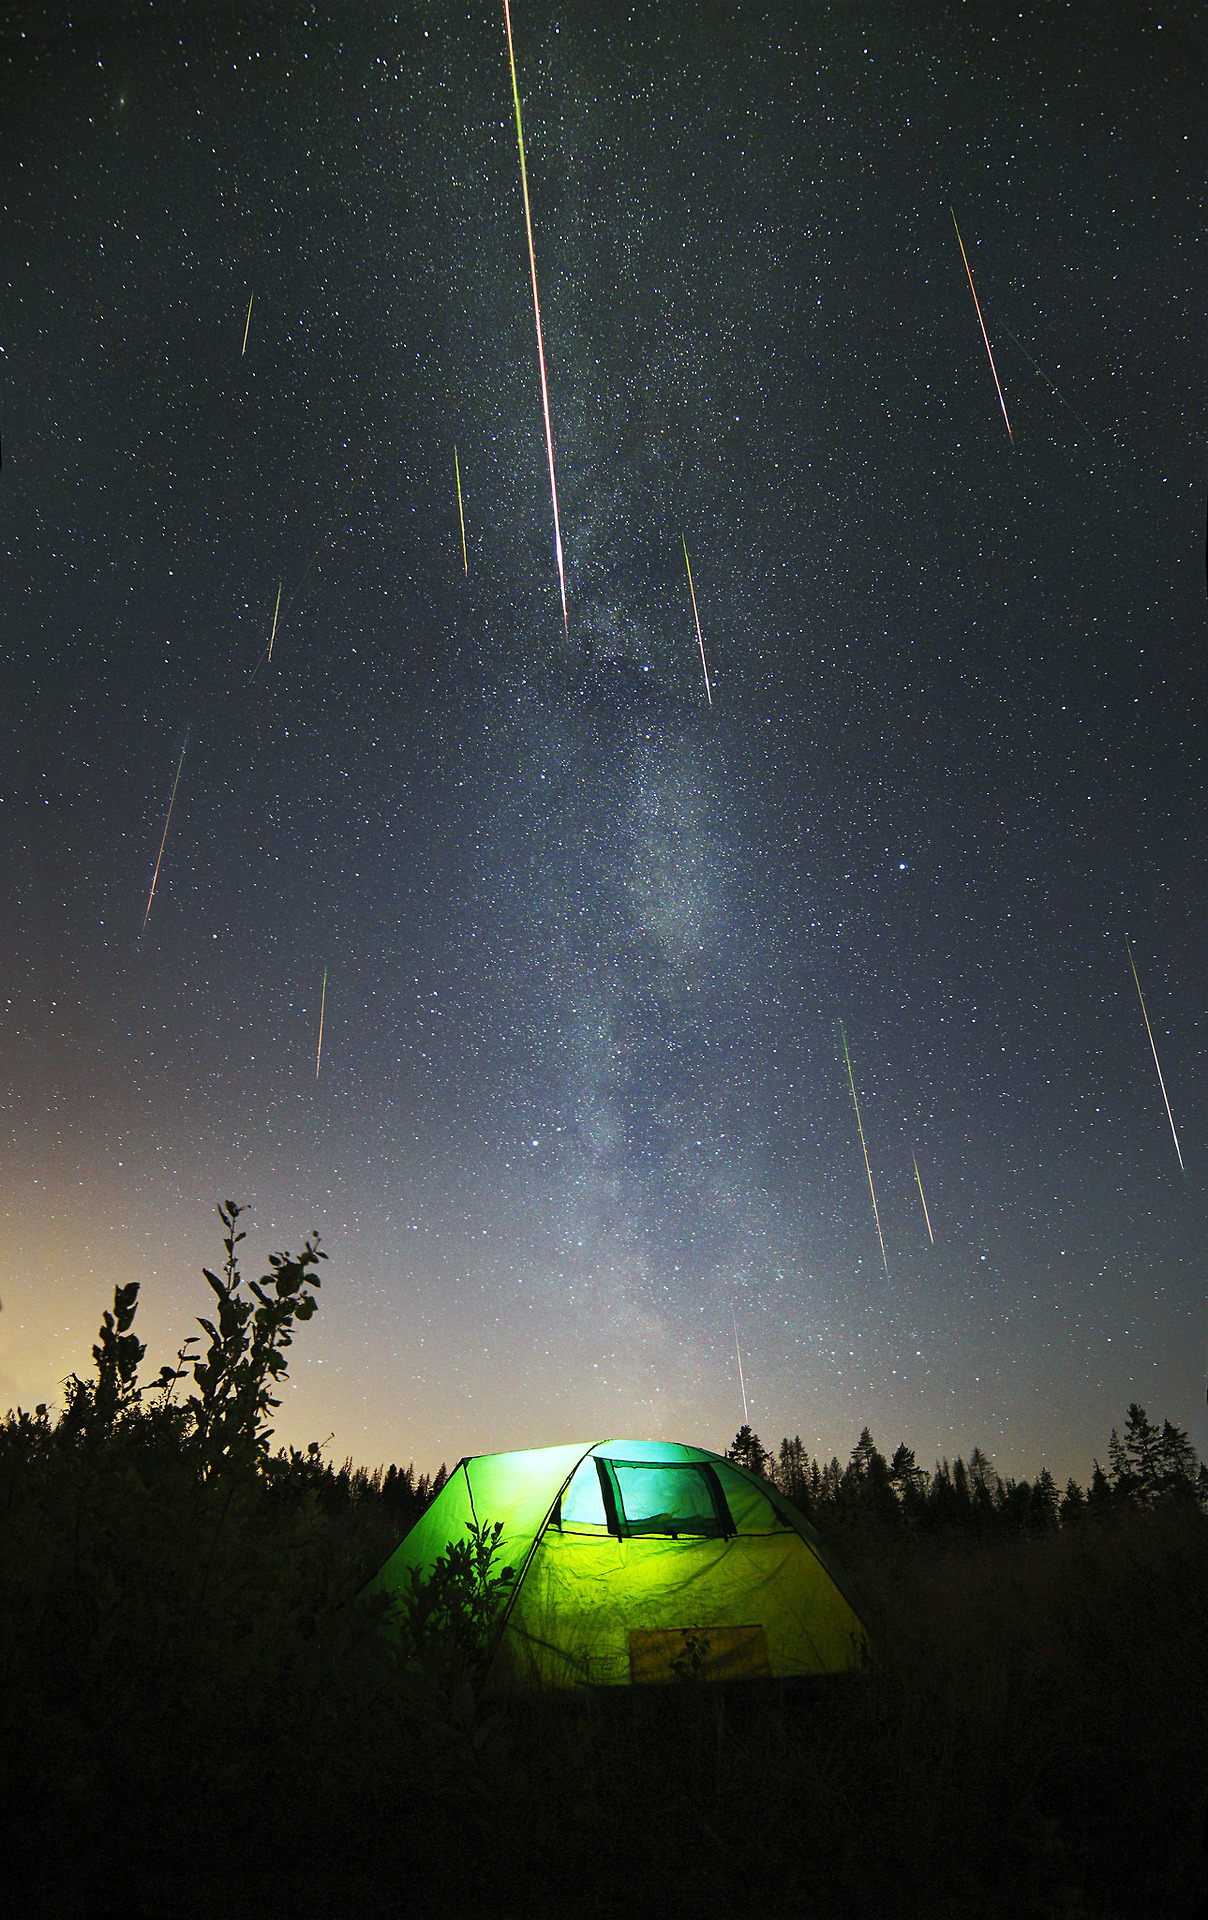 astronomyblog:    Camping under perseids in 2015  by: Mikhail Reva